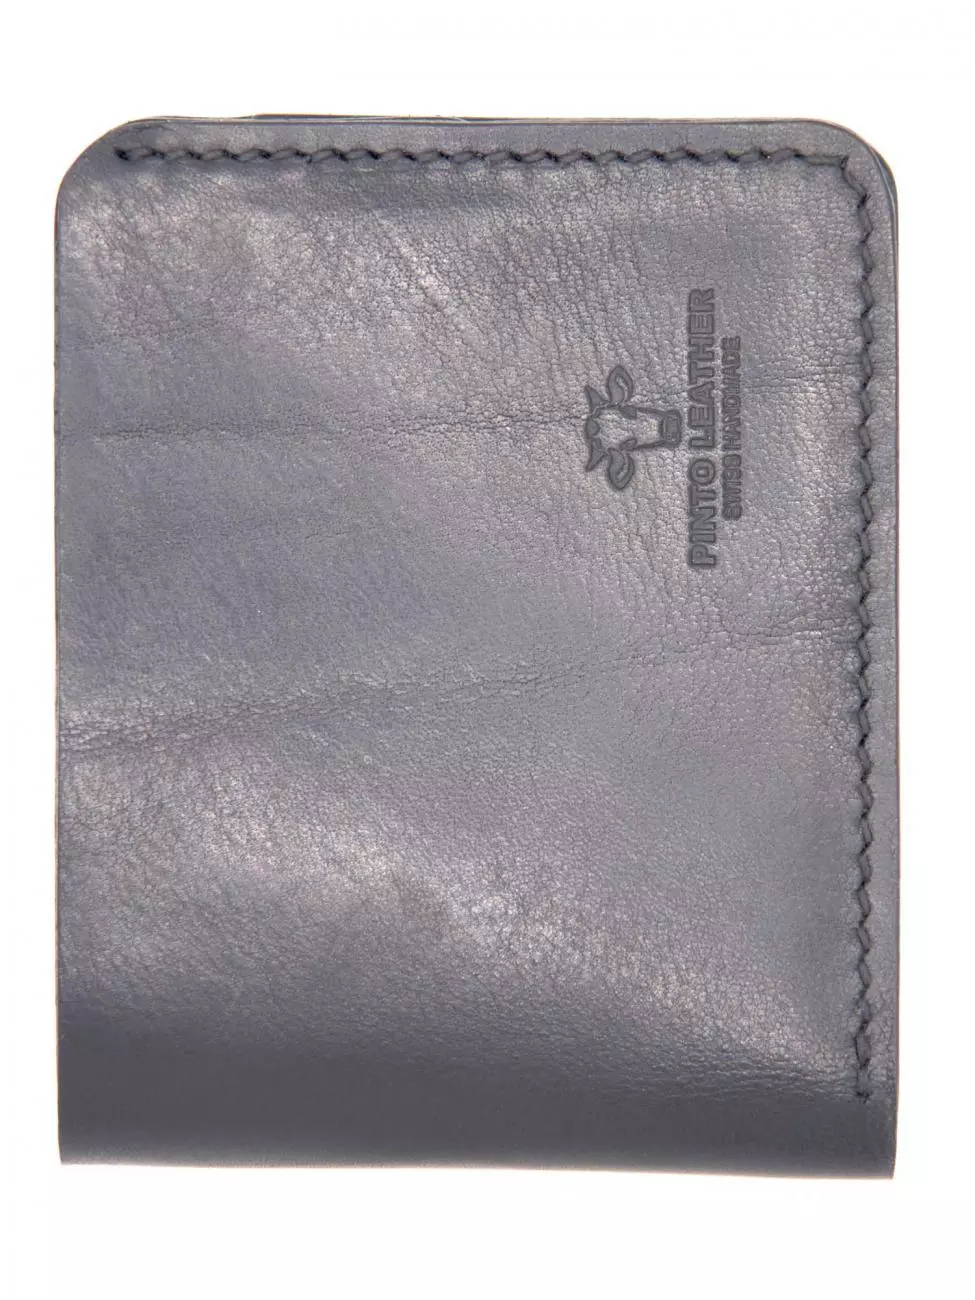 6 - Small leather wallet